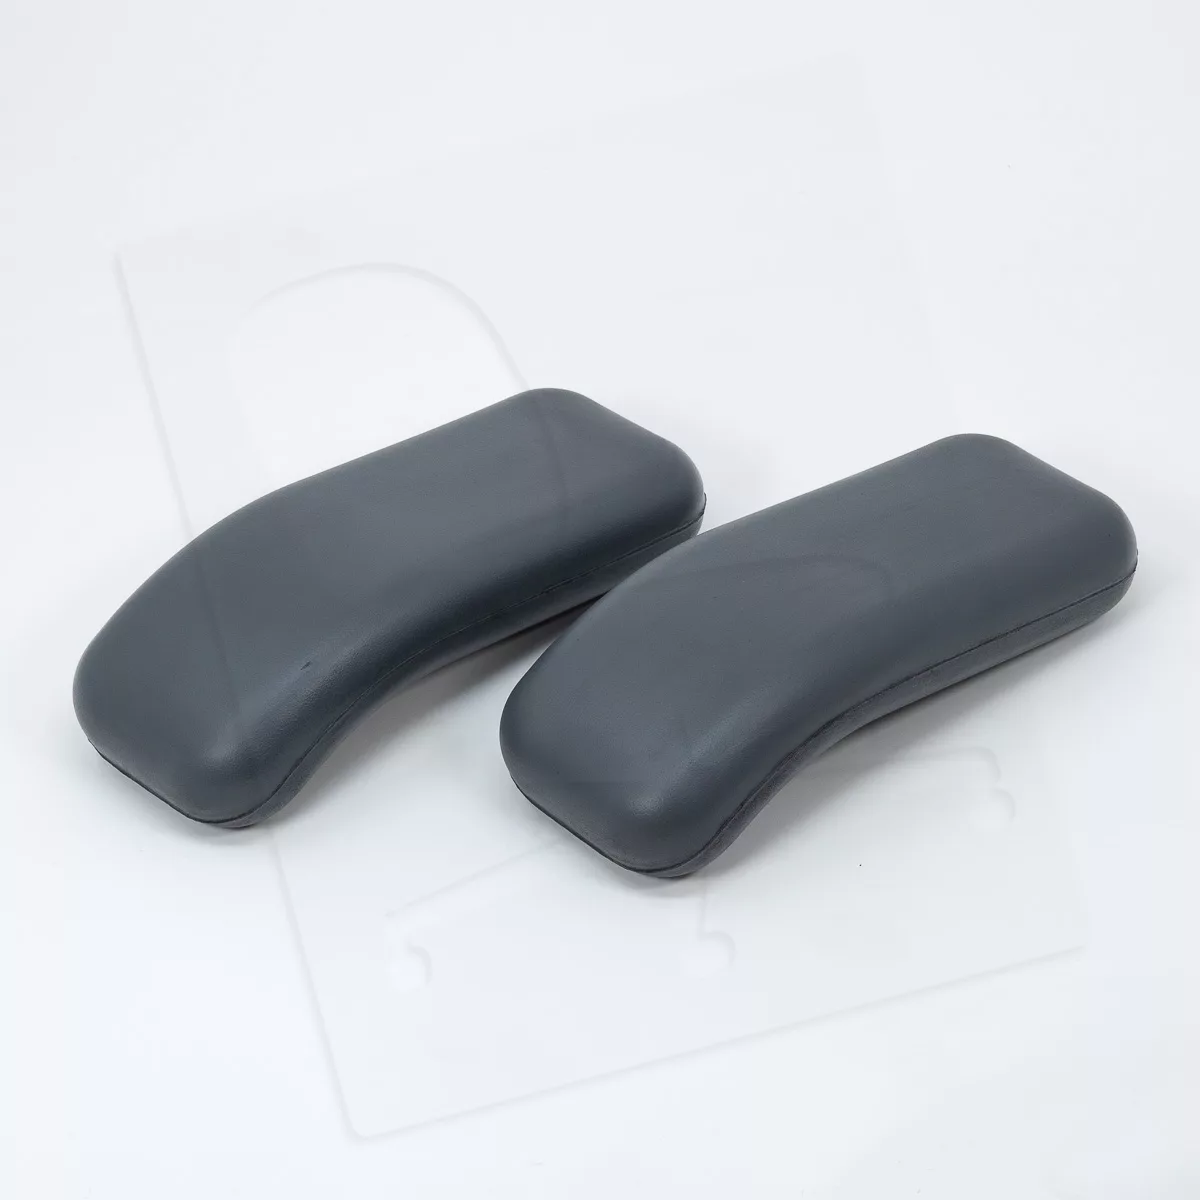 Crandall Office Furniture aftermarket replacement Herman Miller Equa Arm Pads - Grey 0001